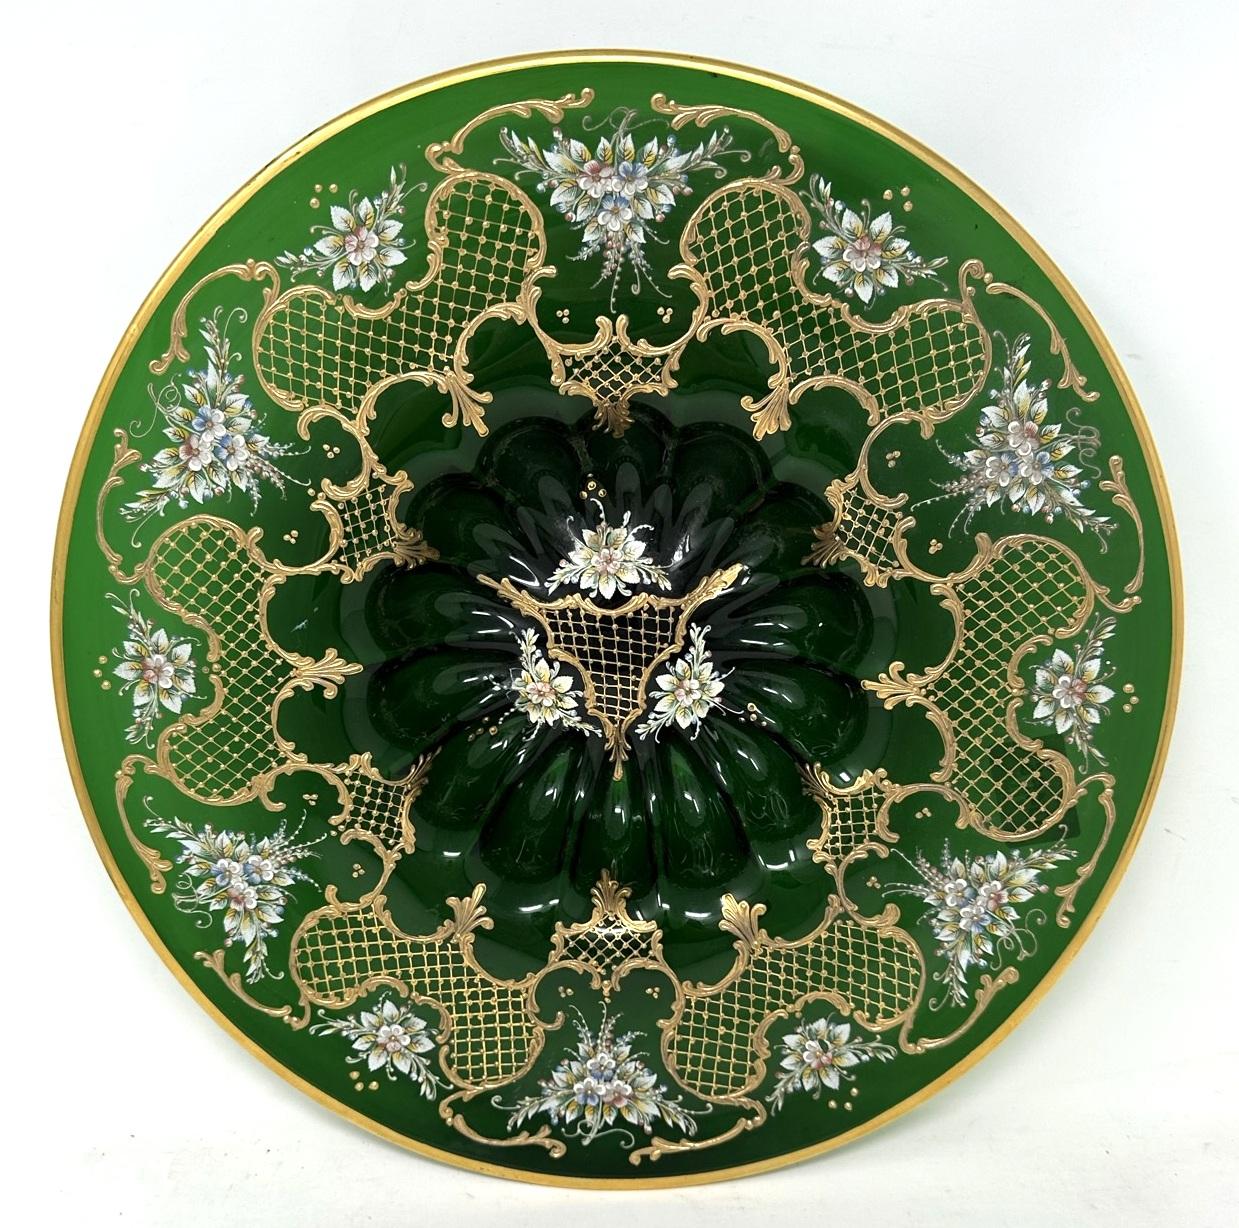 Stunning example of a Moser Bohemian hand enameled floral and raised gilt Emerald Green Glass deep dish Centerpiece or Cabinet Plate of large proportions, early to mid-Twentieth Century.  

The entire area with lavish raised gilding and a border